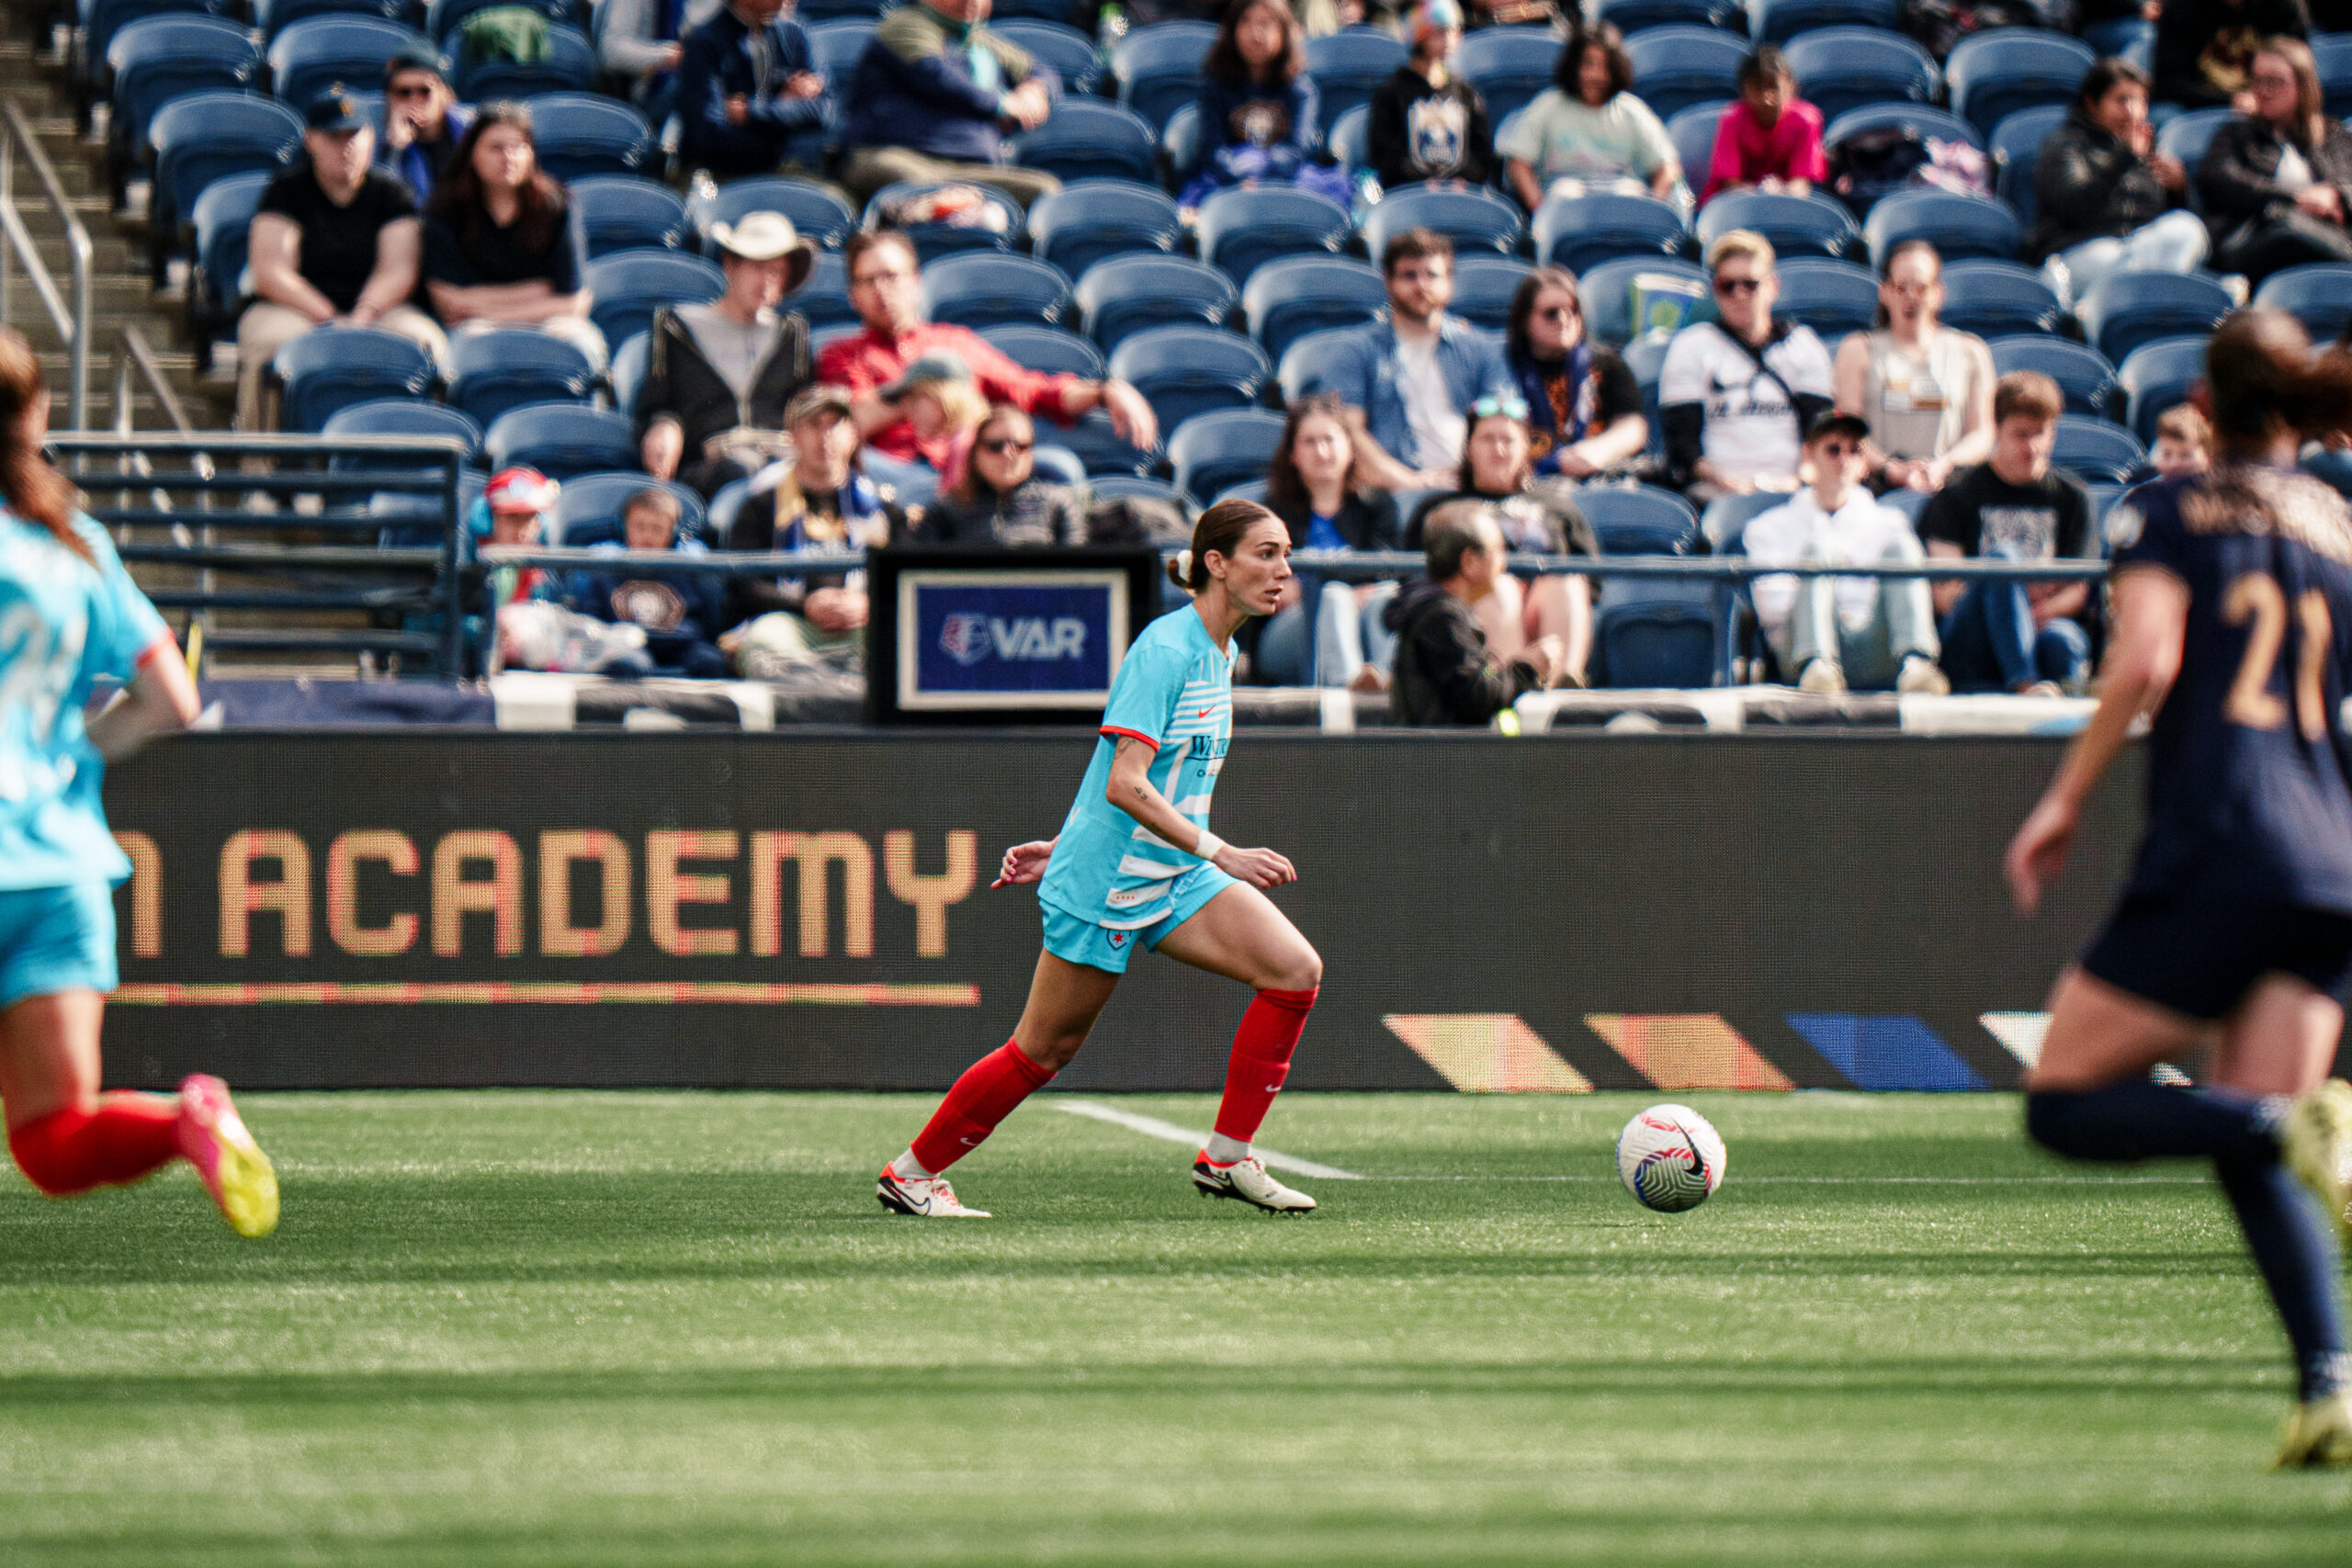 Chicago Red Stars’ Tatumn Milazzo Clinches Back-to-Back NWSL Impact Save Awards